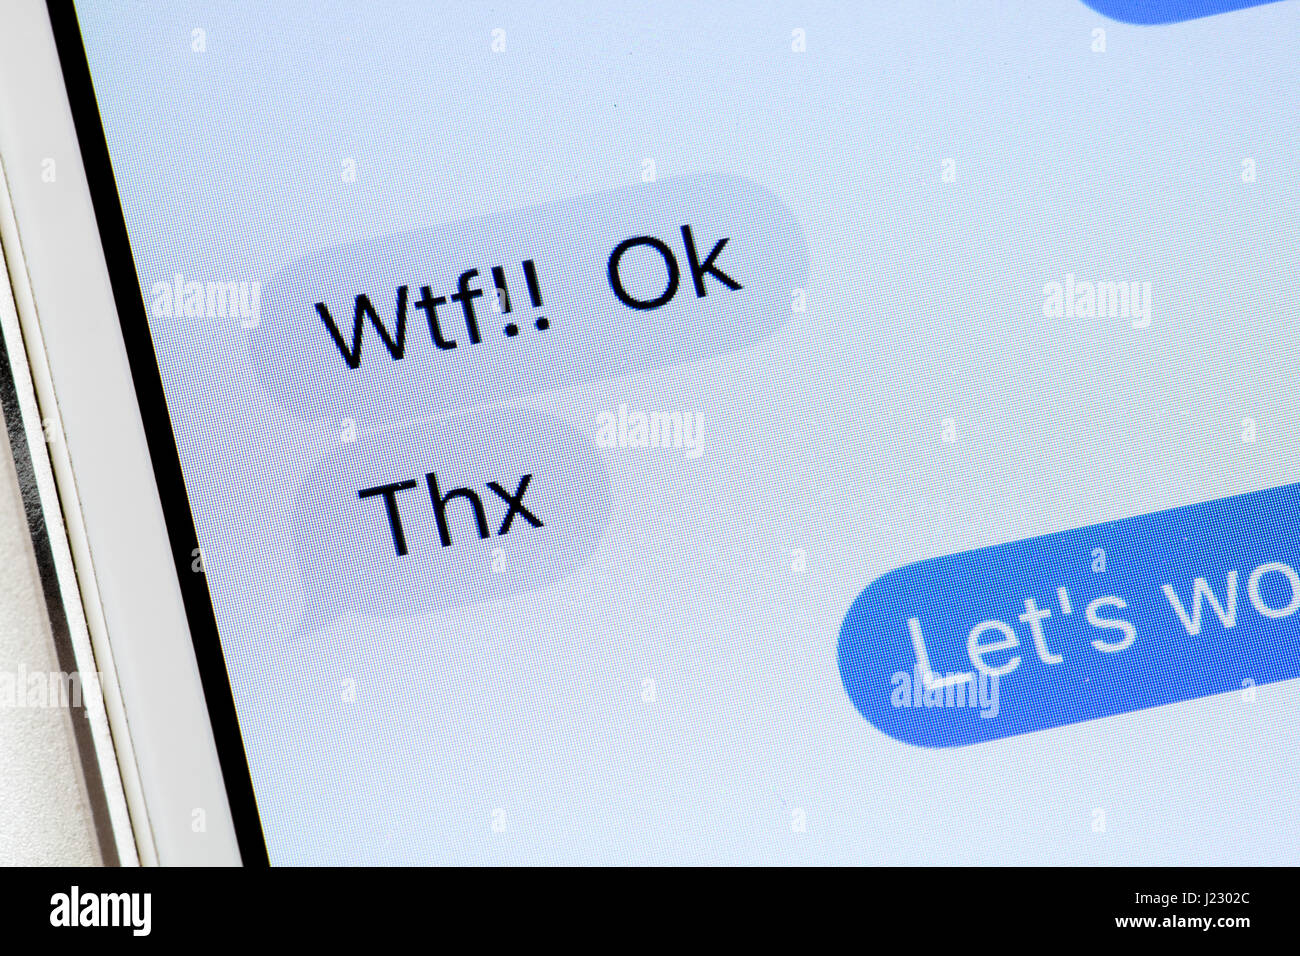 Text message on iPhone screen (WTF text, Thx text) - USA Stock Photo